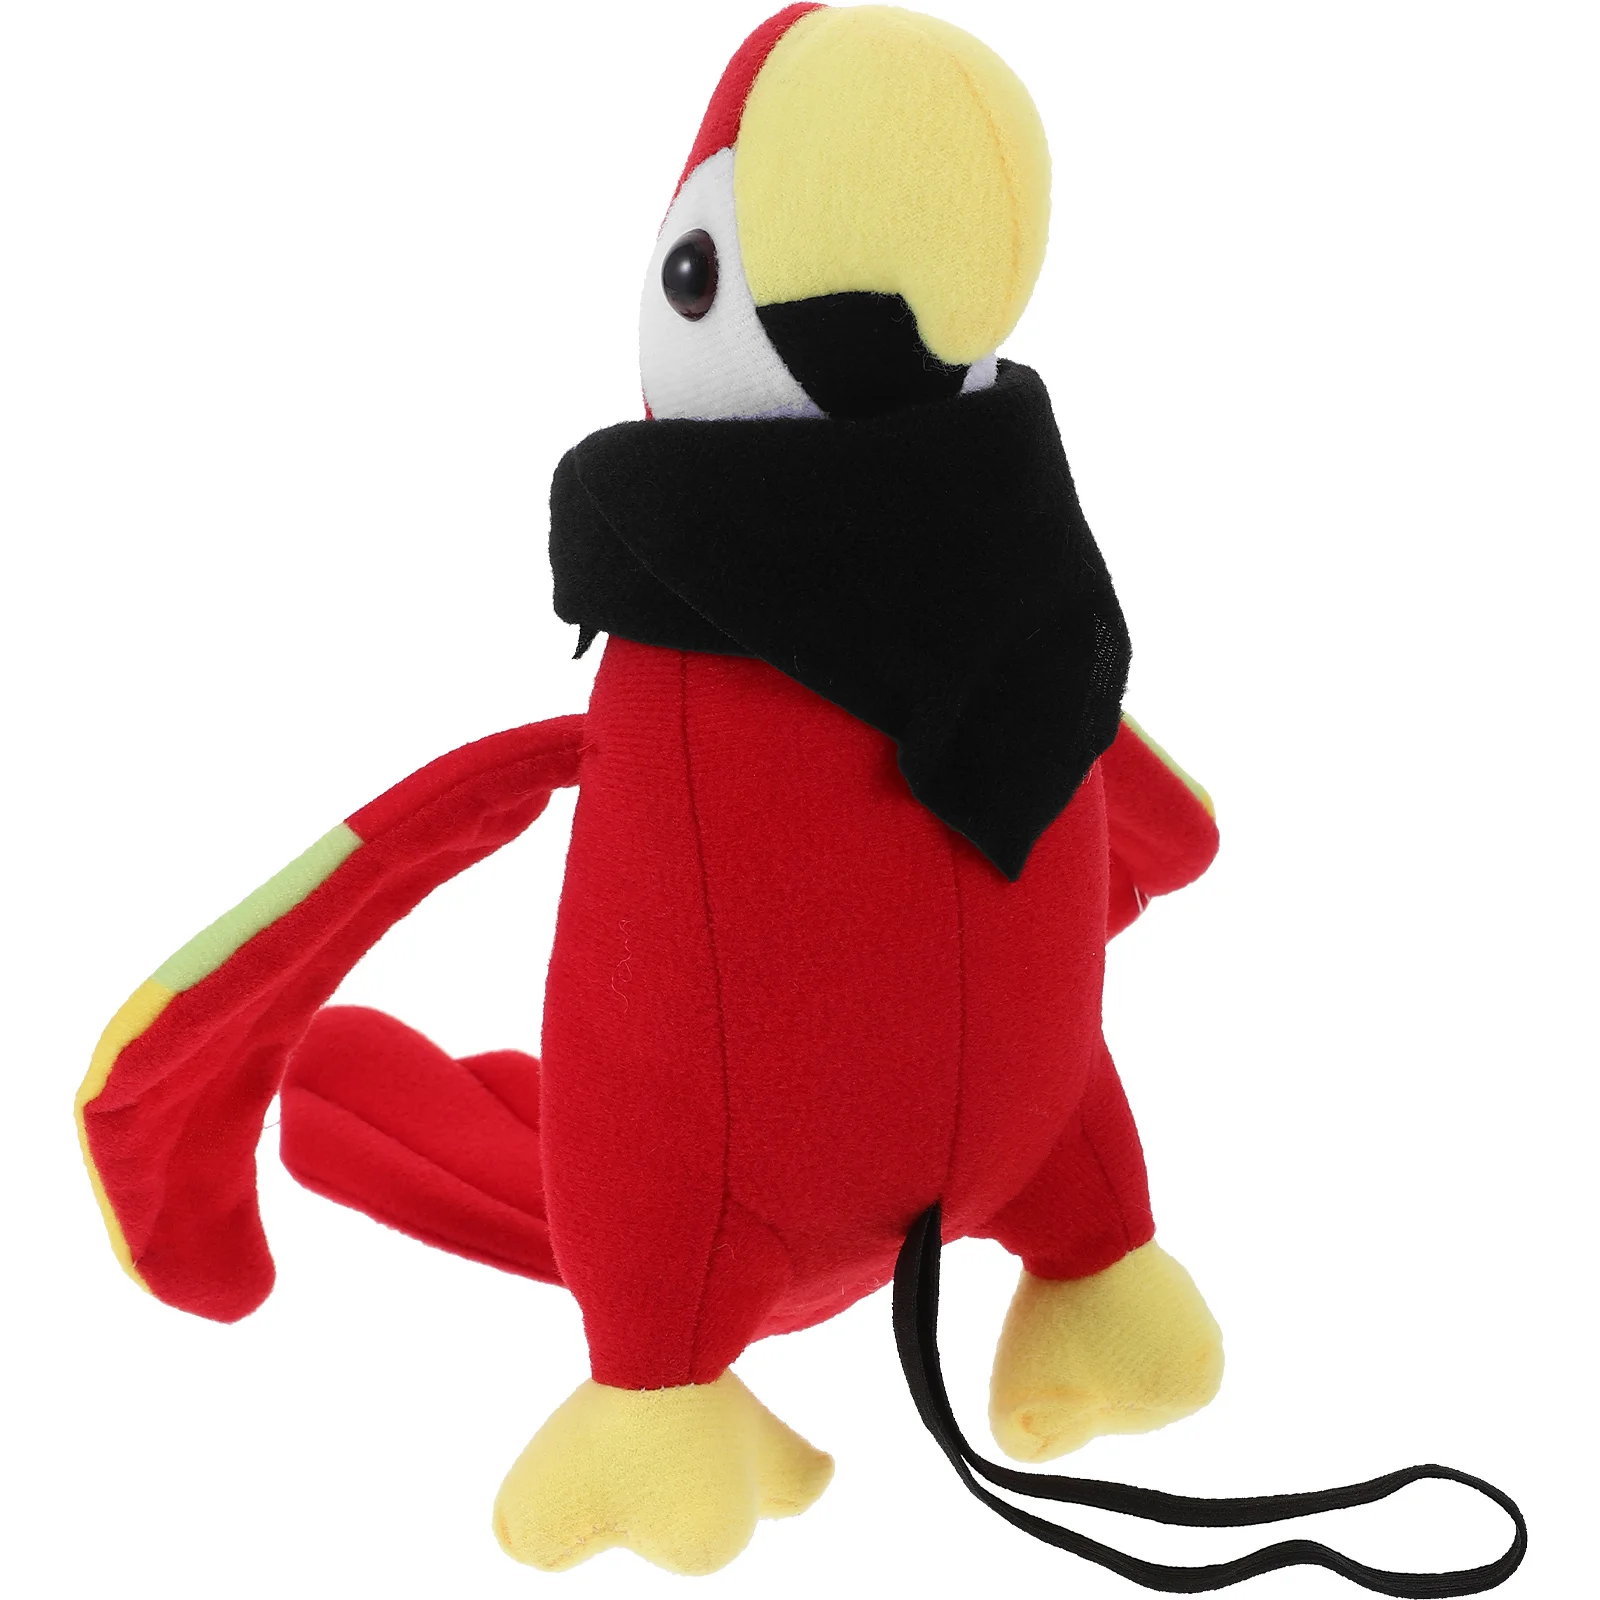 

Halloween Pirate Costume Accessory Cosplay Outfits Simulation Parrot Ornaments Props Realistic Stuffed Bird Model Plush Supply